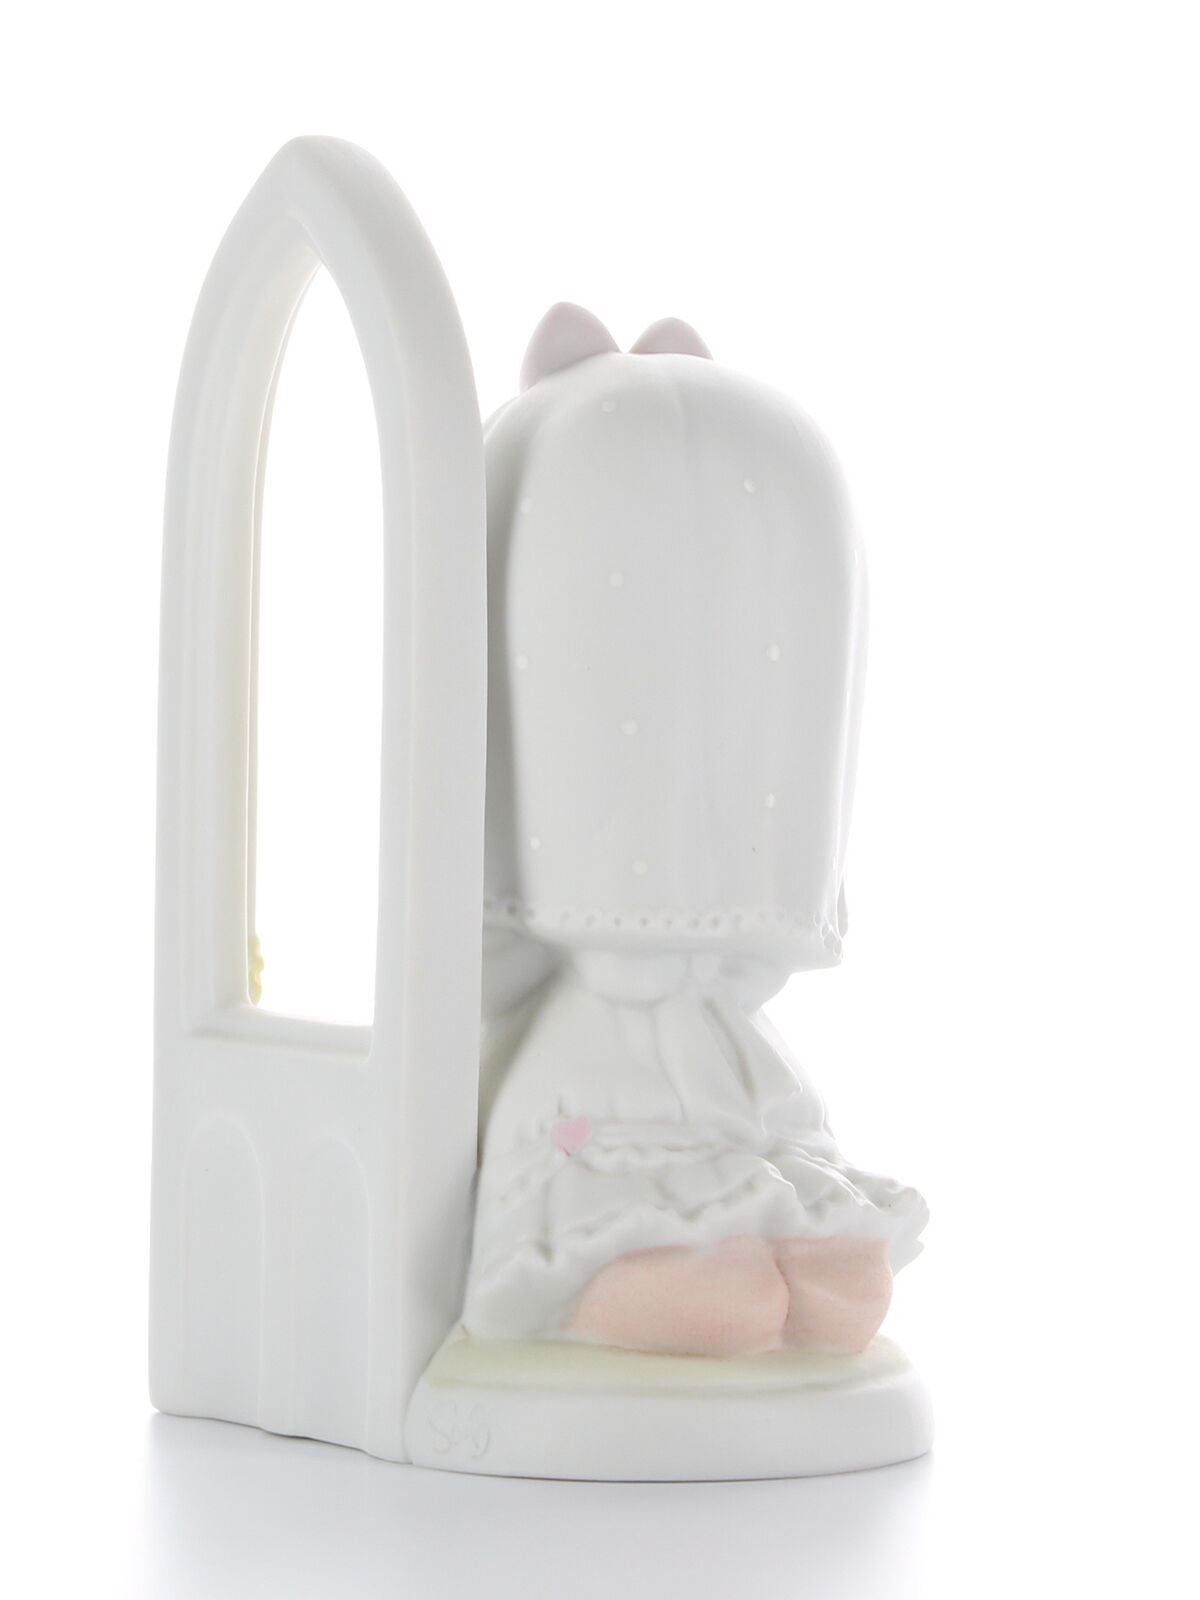 Precious Moments Enesco Porcelain Wedding Figurine May Your Future Be Blessed